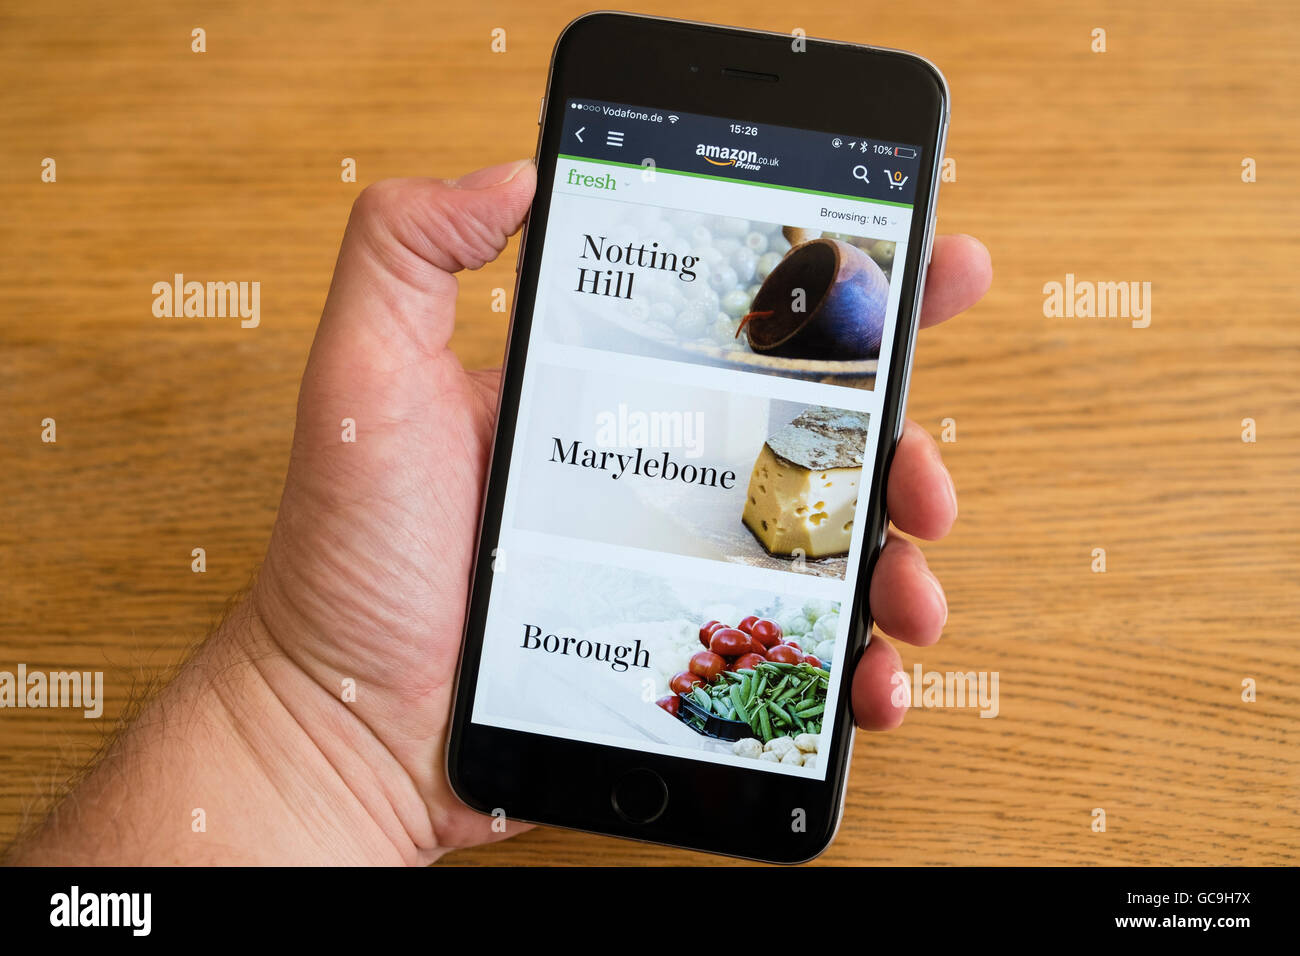 Amazon Prime Fresh food delivery service app shown on an iPhone 6 smart phone Stock Photo